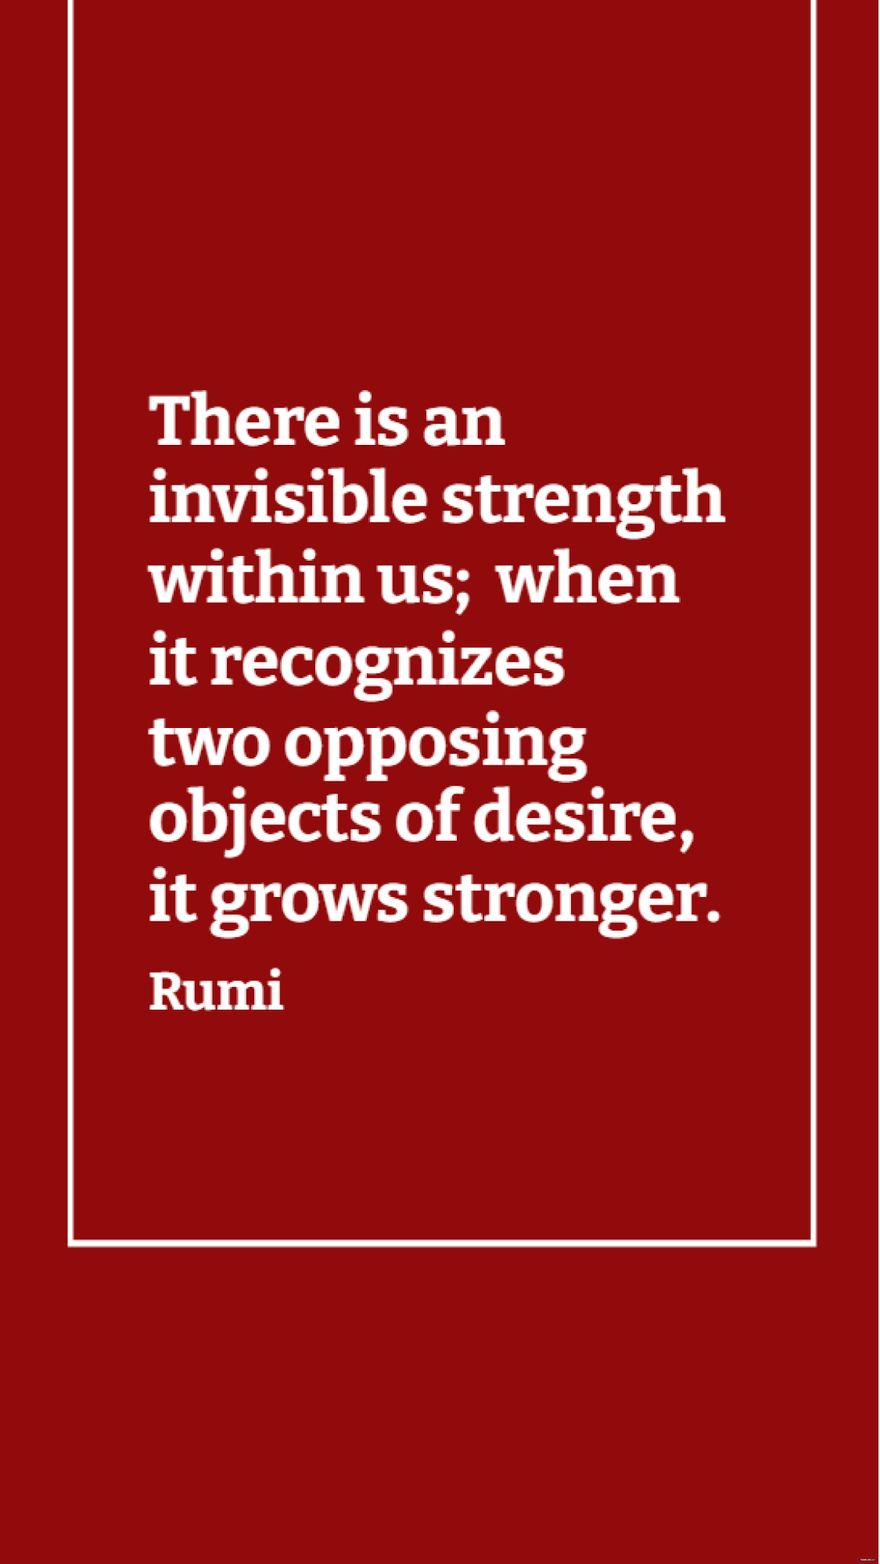 Rumi - There is an invisible strength within us; when it recognizes two opposing objects of desire, it grows stronger.